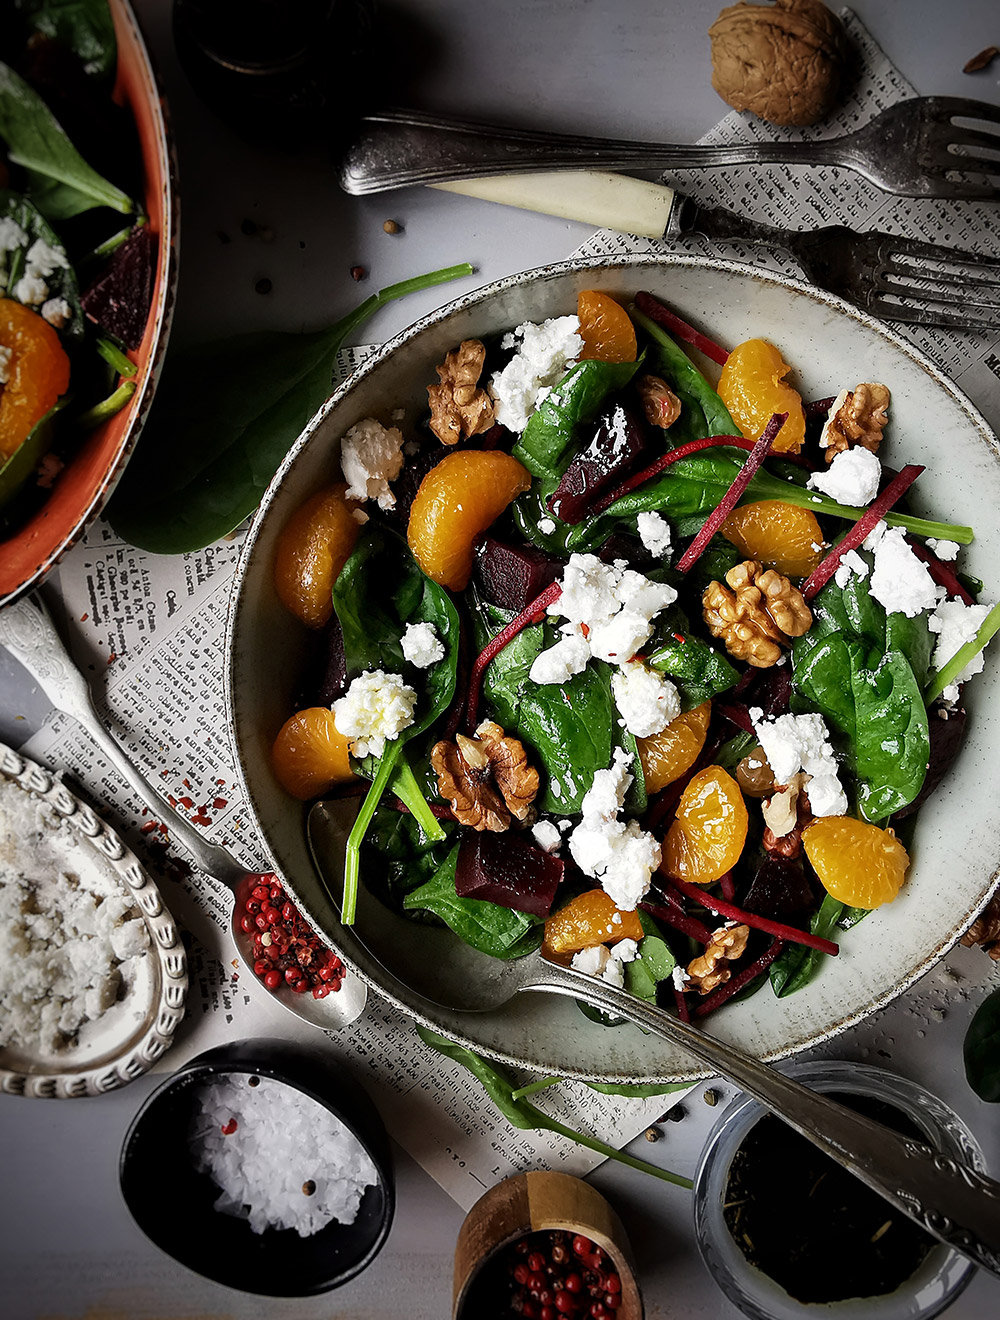 Spinach, goat cheese and tangerine salad